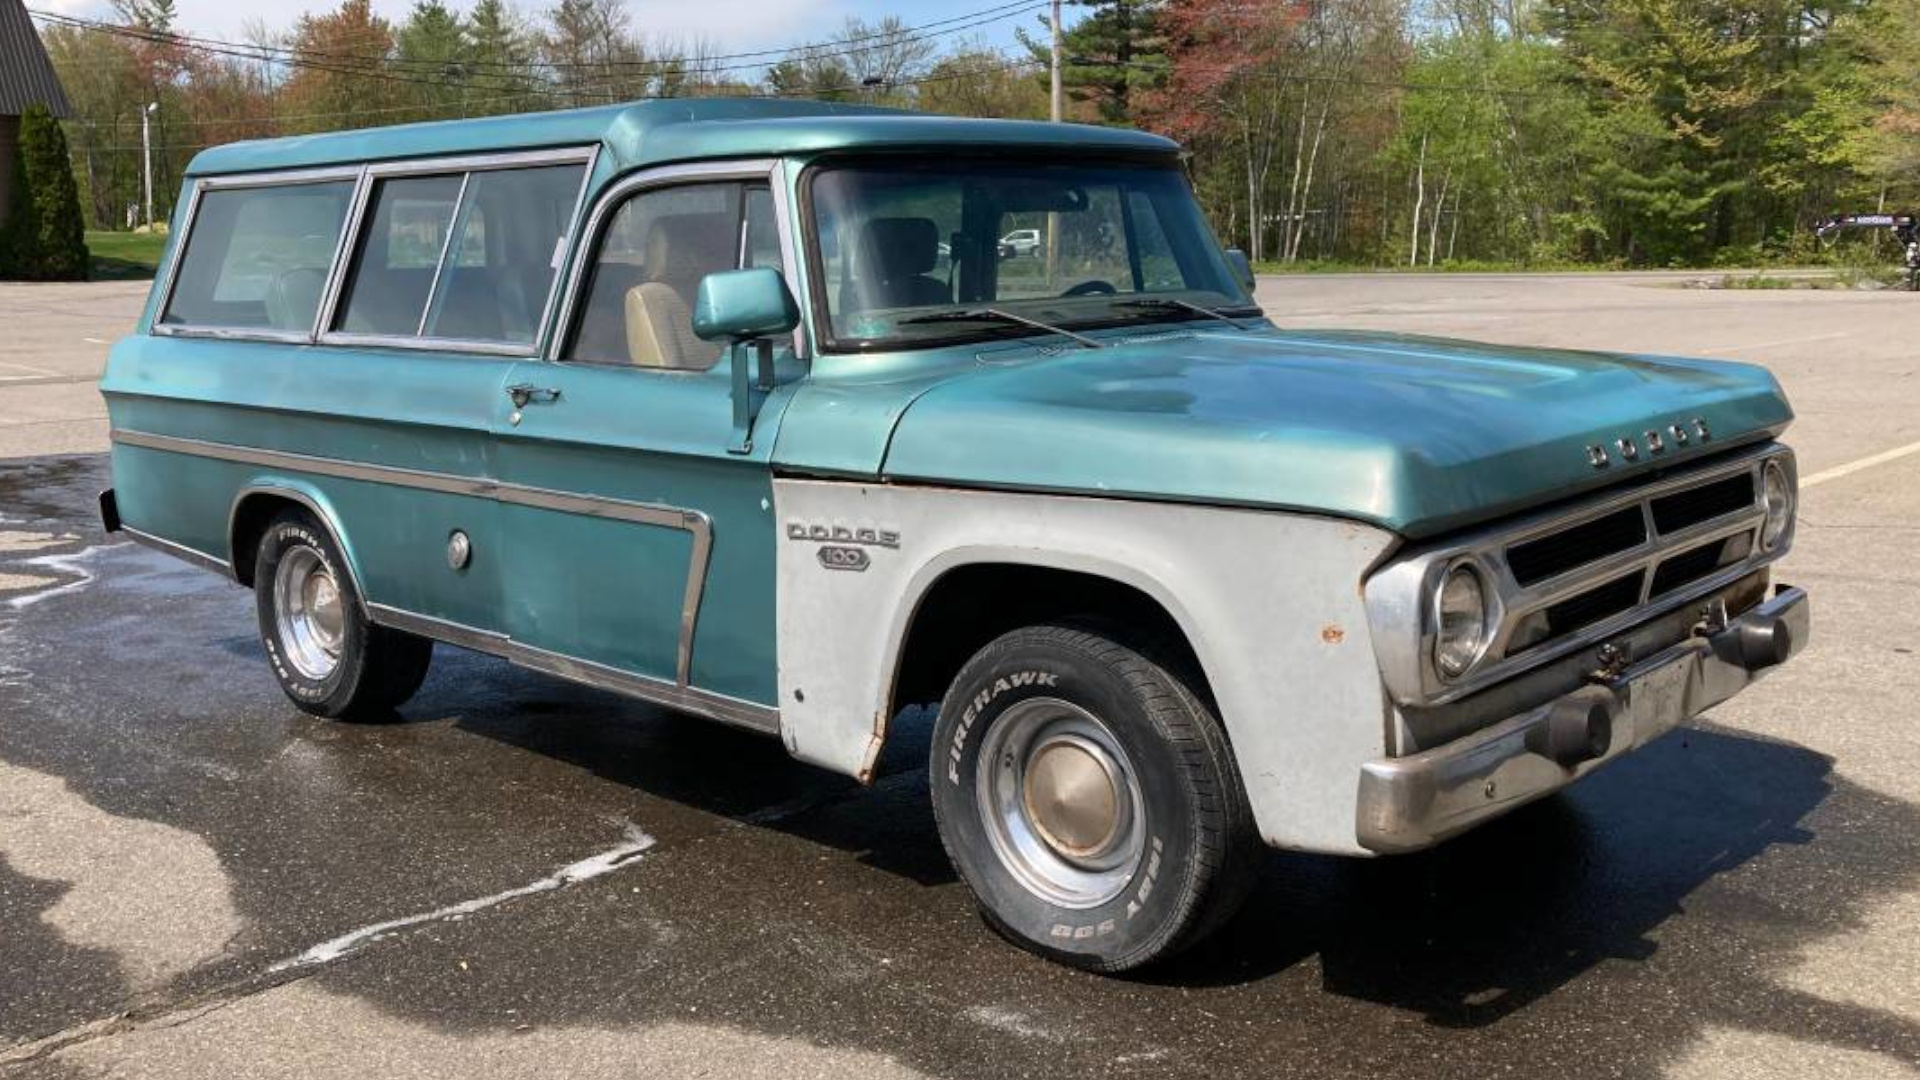 They Don’t Make ‘Em Like This Nine-Passenger, Two-Door 1972 Dodge D100 Anymore